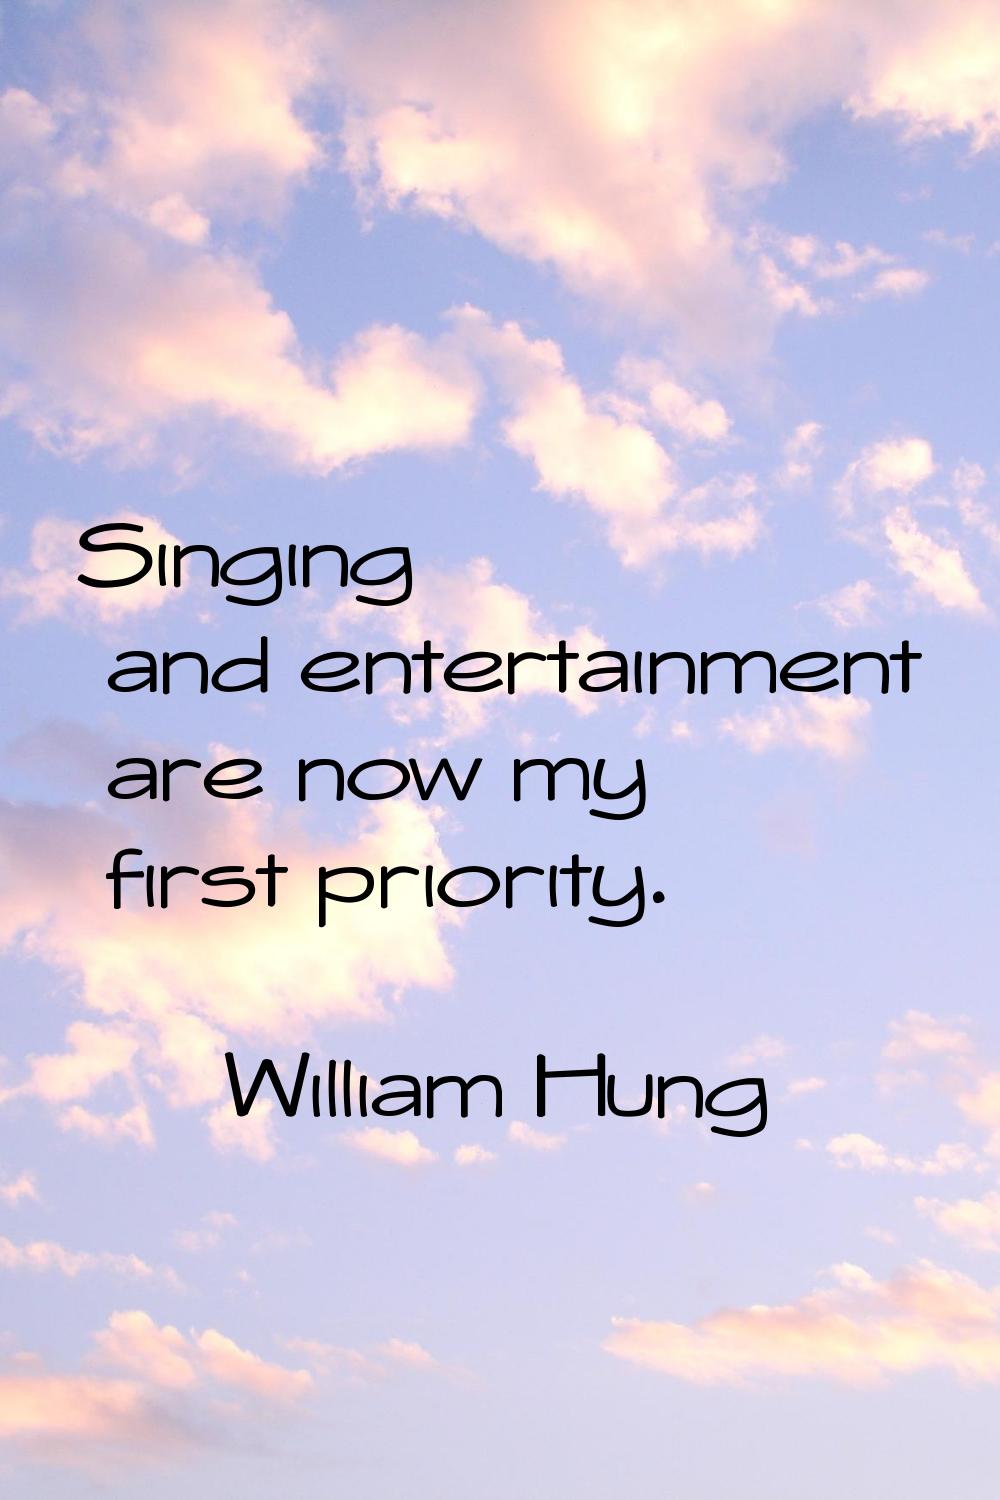 Singing and entertainment are now my first priority.